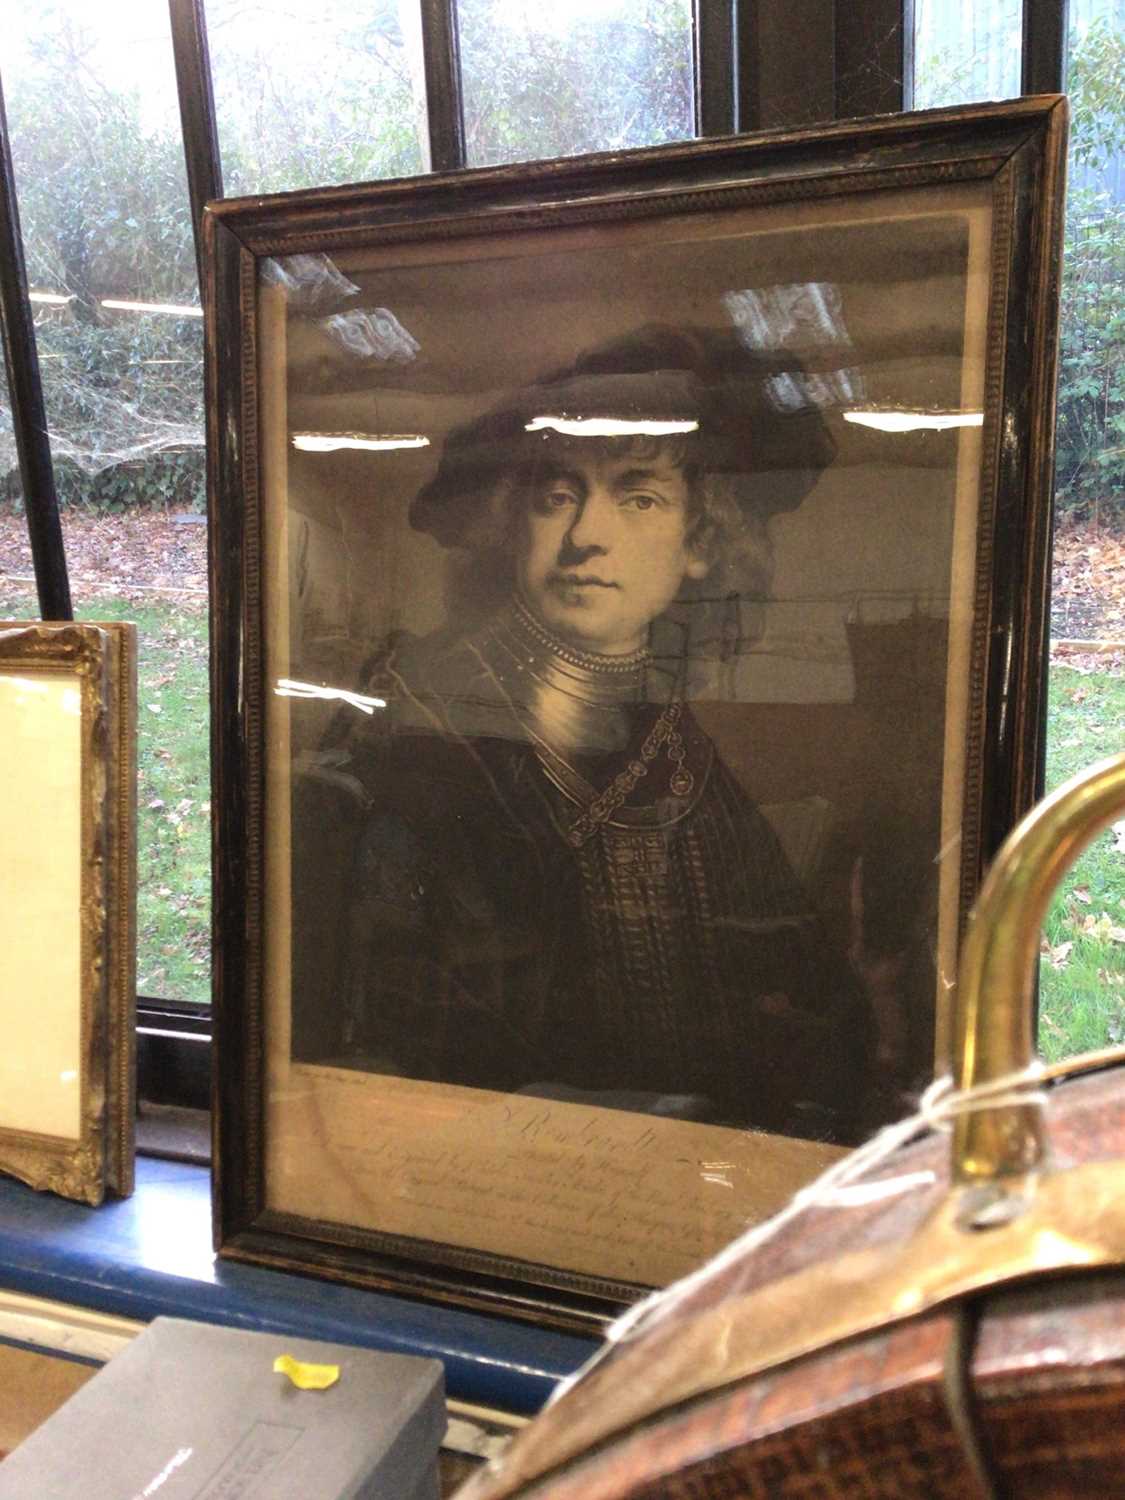 Lot 44 - Framed 18th century engraving of Rembrandt